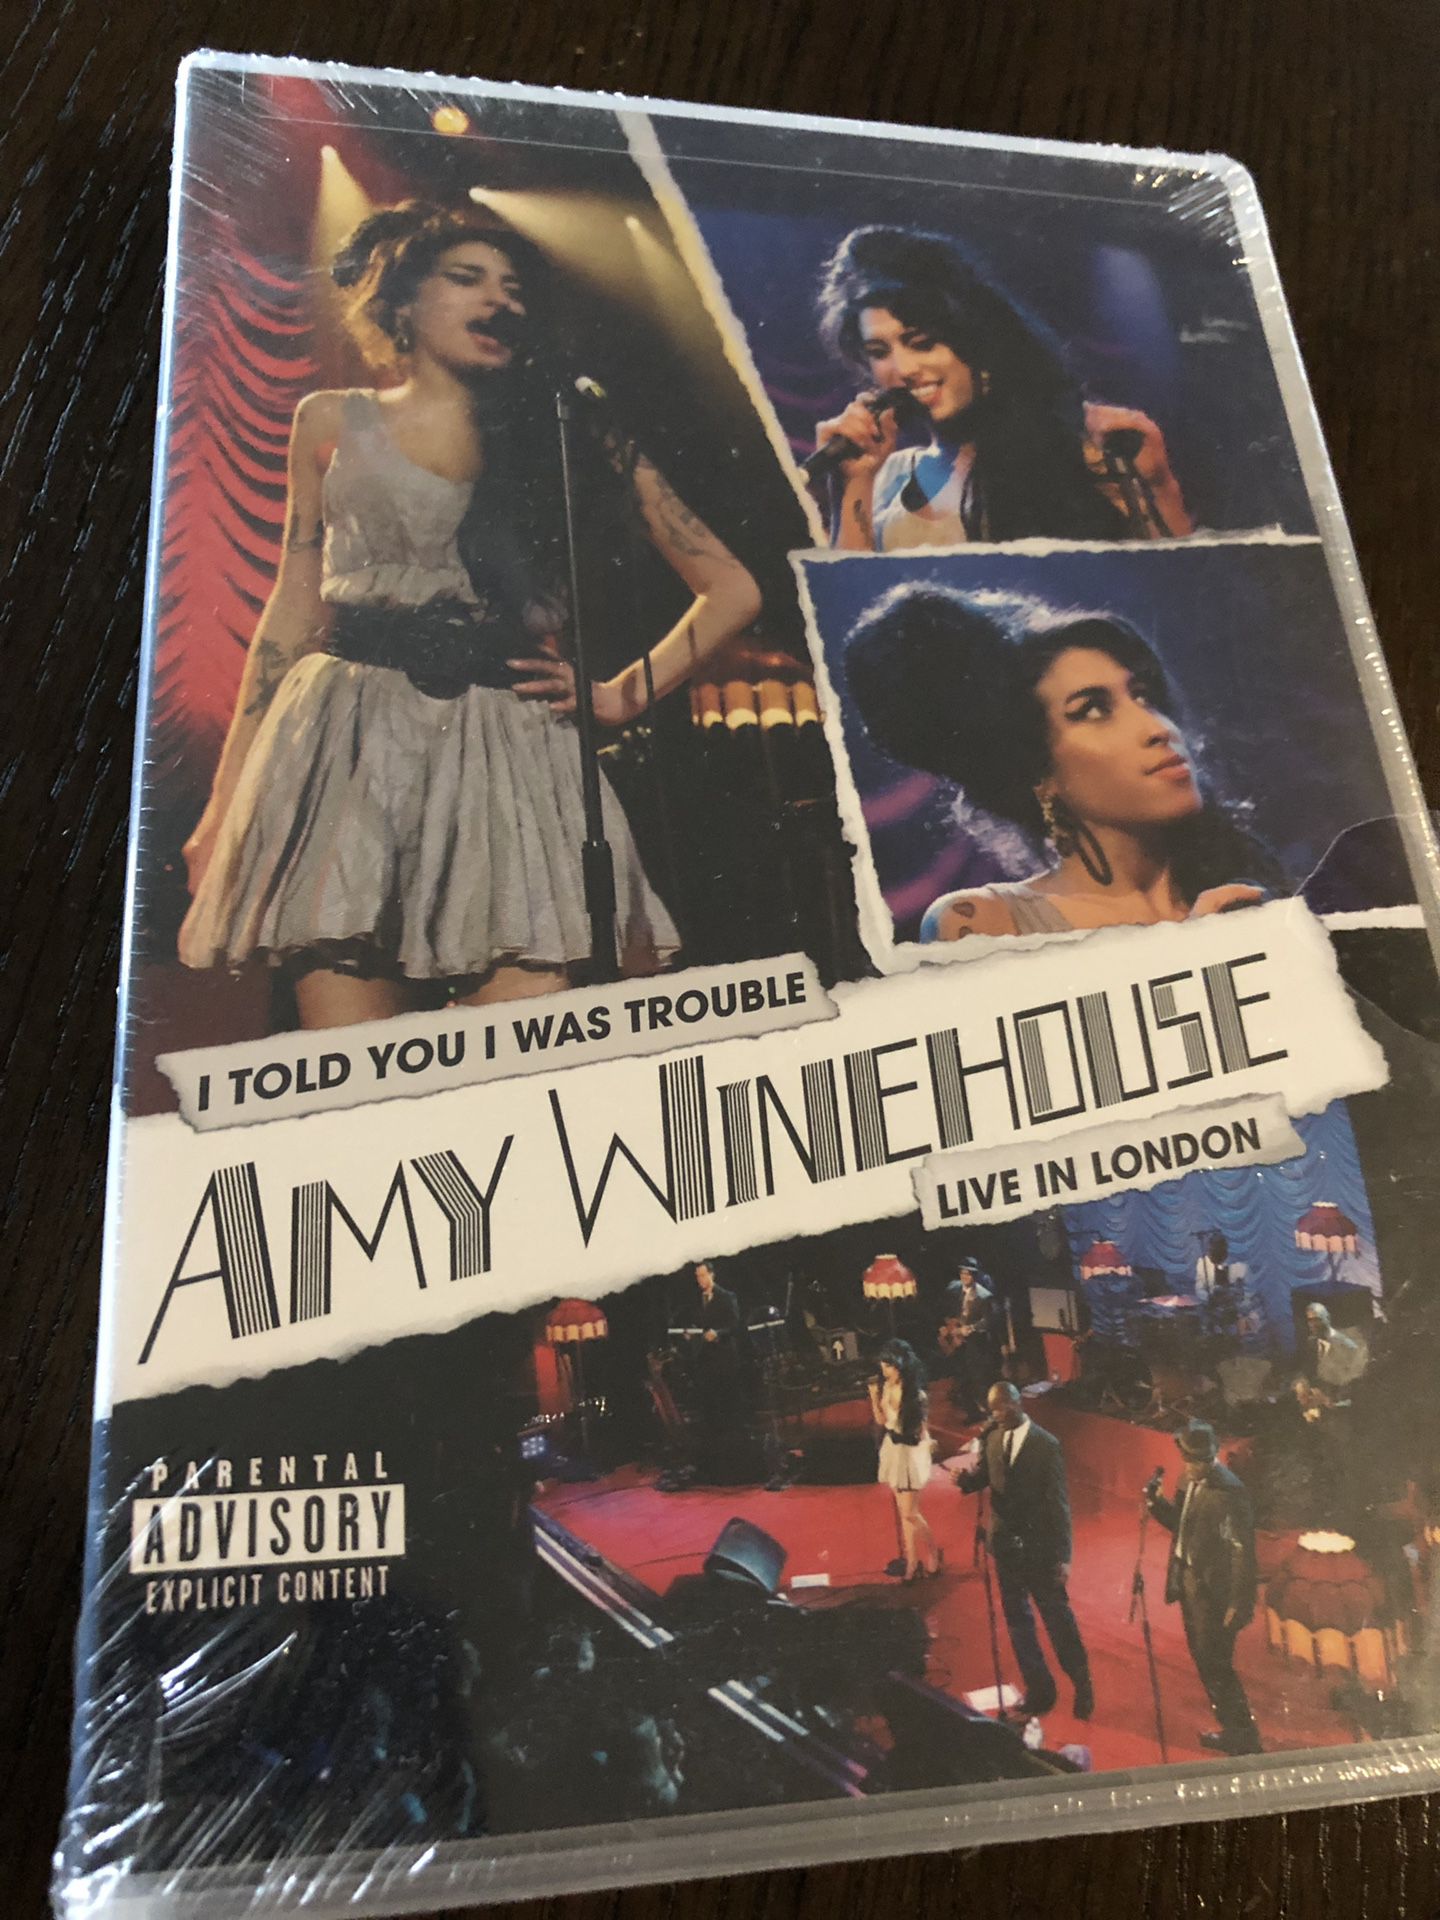 Amy Winehouse Live In London import sealed